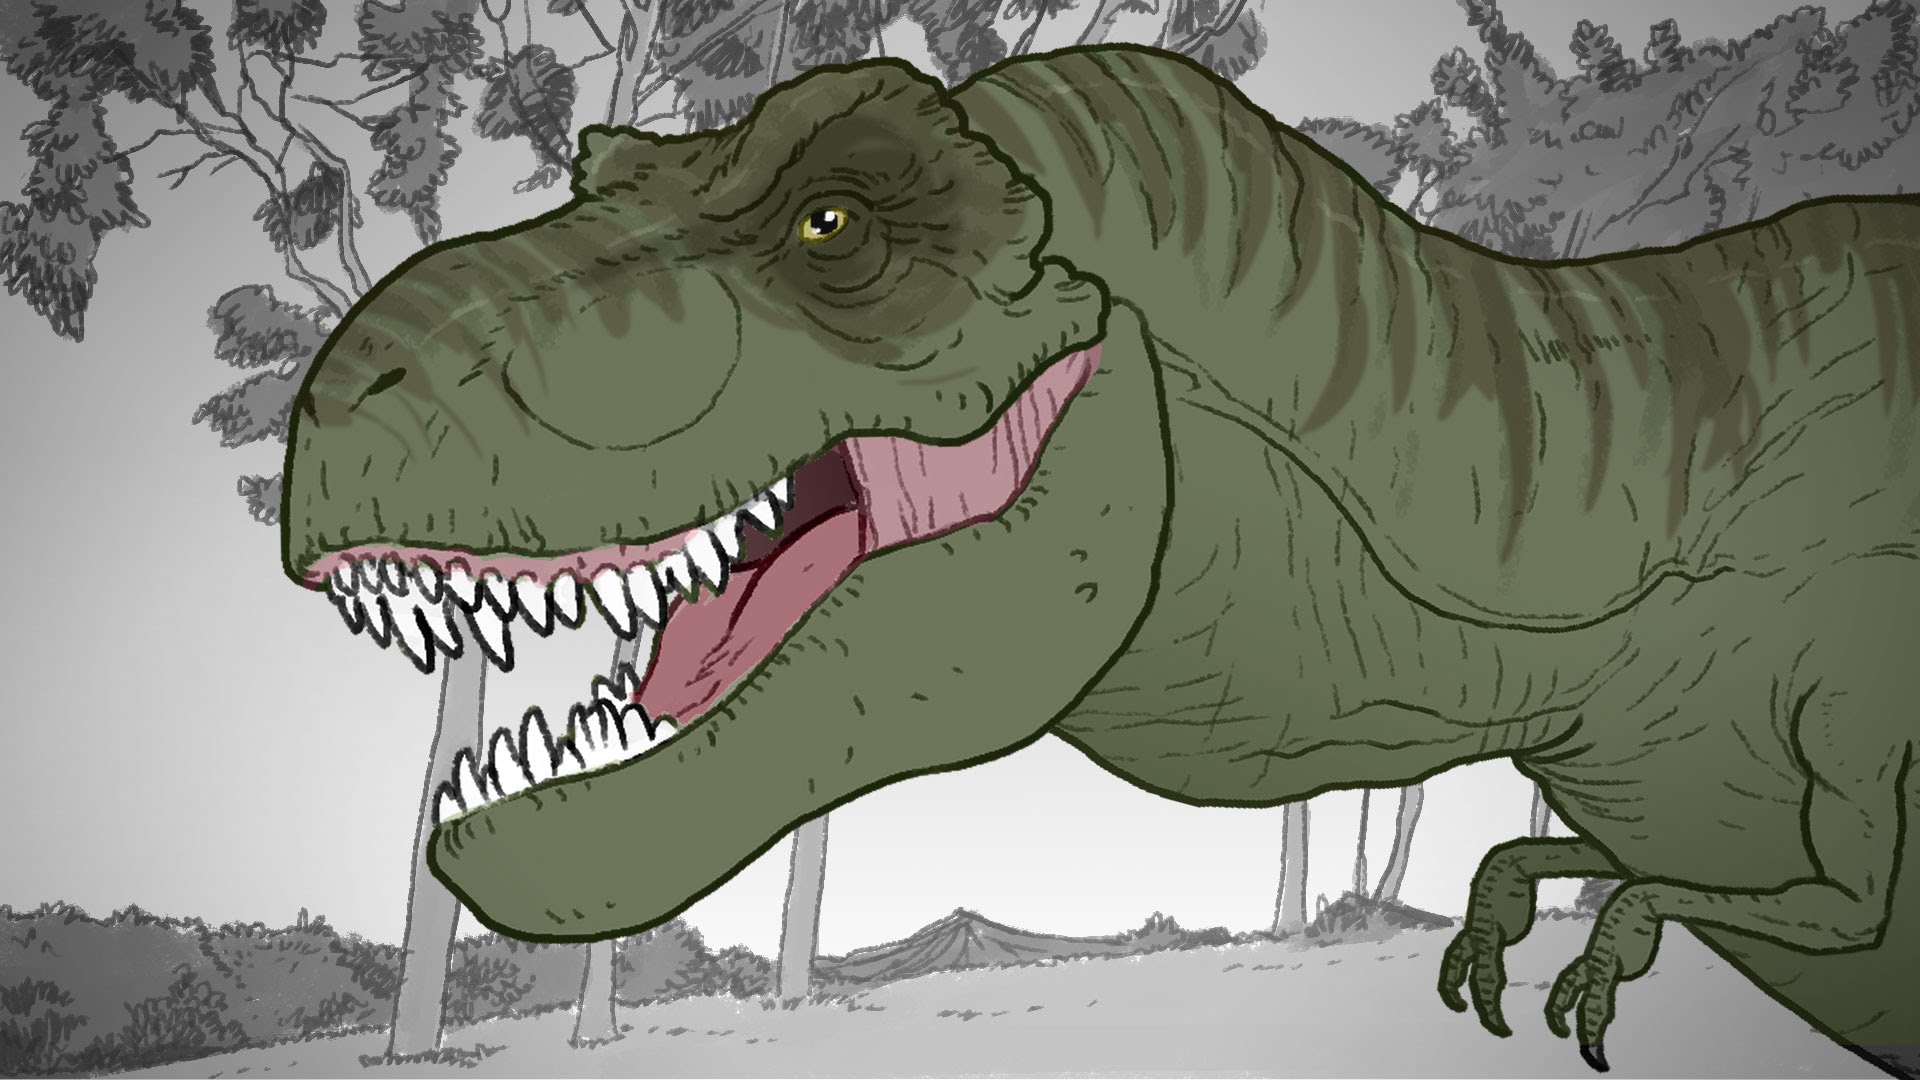 TL;DW' Sums Up the Entire 'Jurrasic Park' Film Trilogy in Three and a Half  Animated Minutes